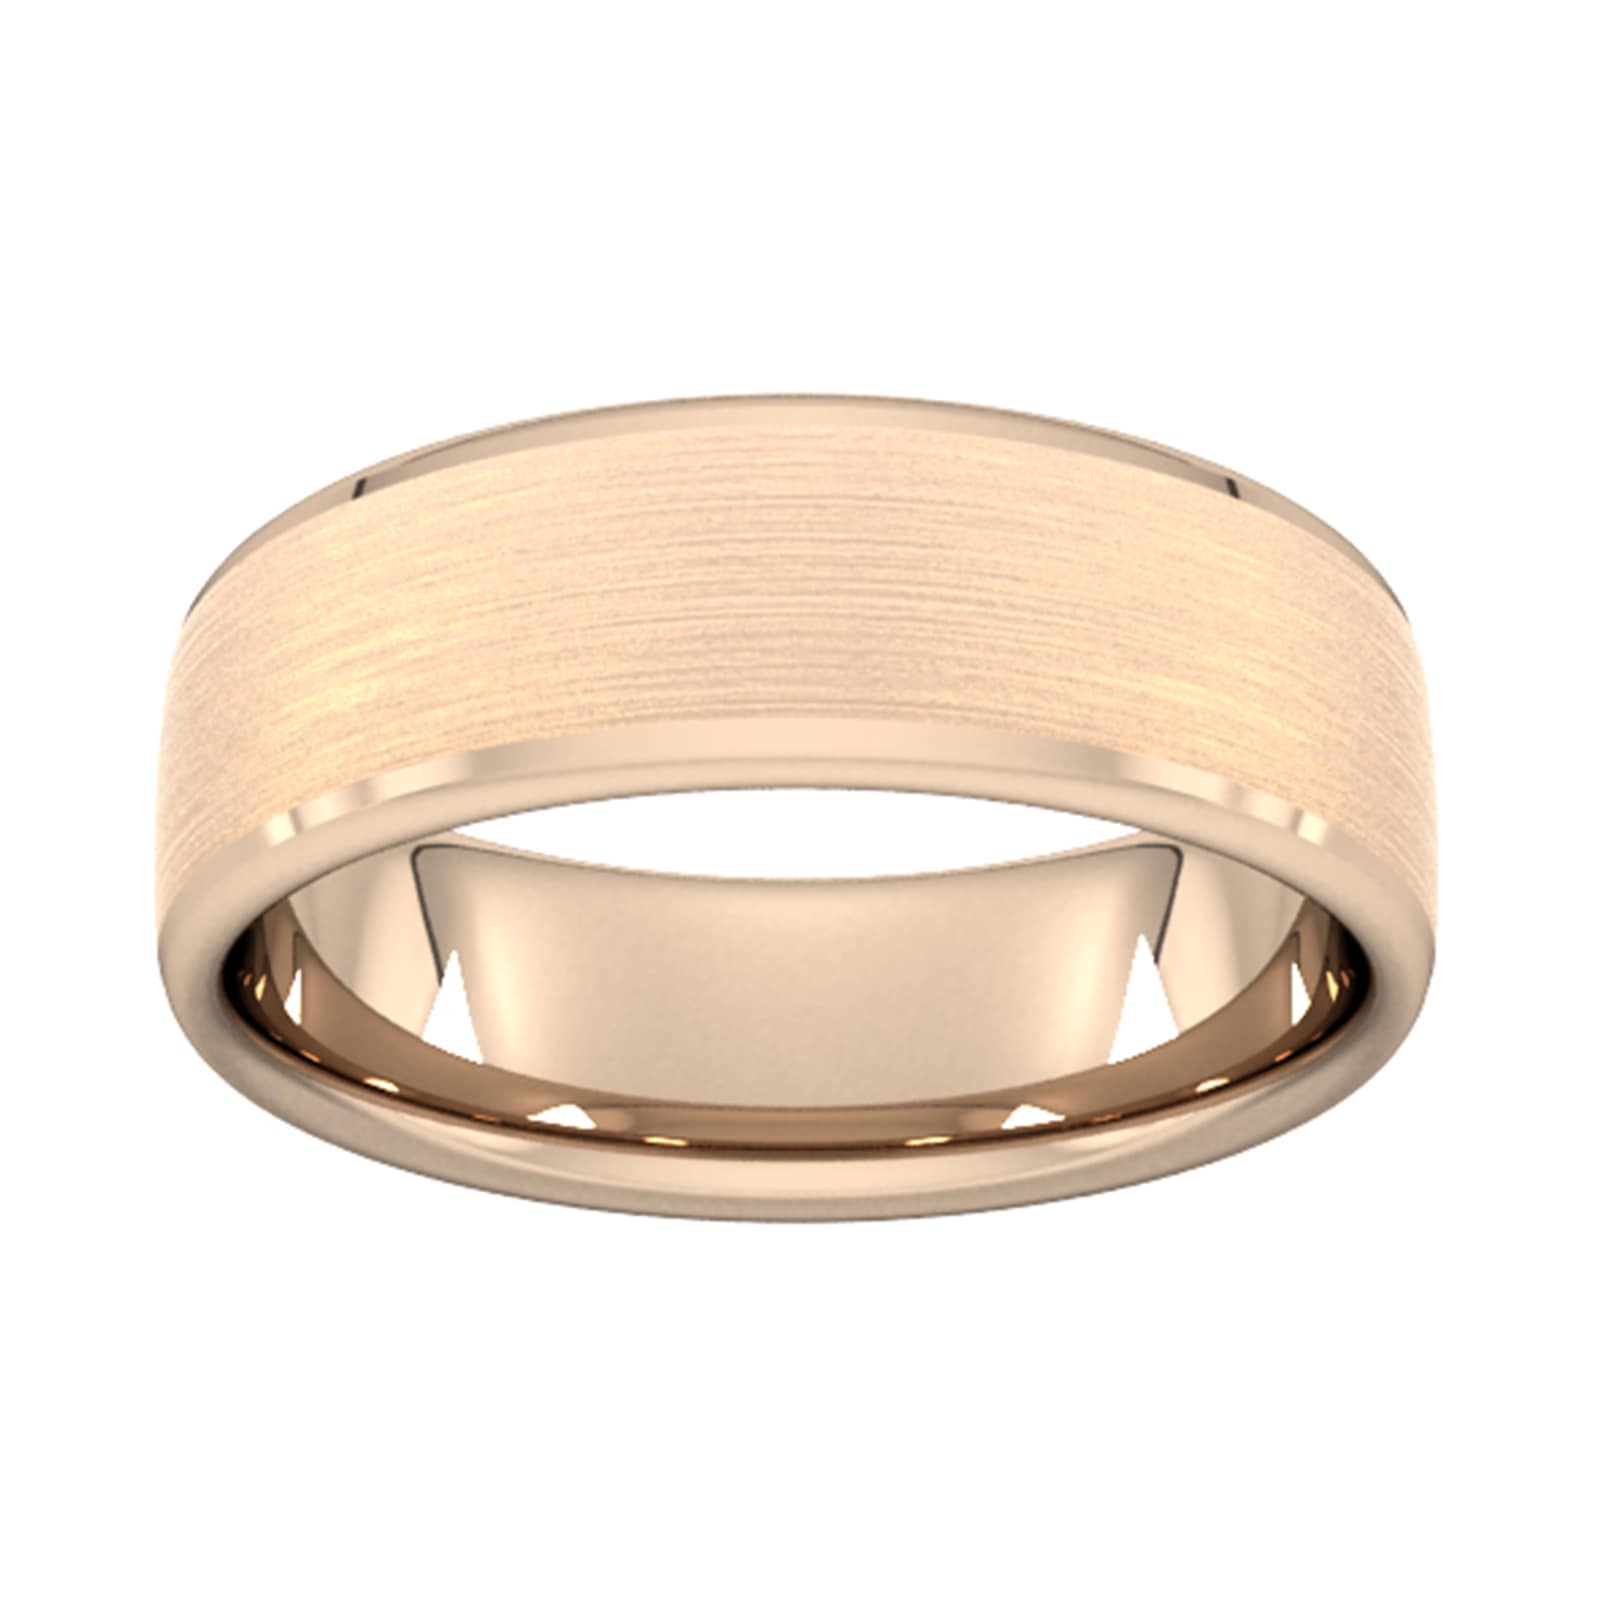 7mm Slight Court Heavy Polished Chamfered Edges With Matt Centre Wedding Ring In 18 Carat Rose Gold - Ring Size P